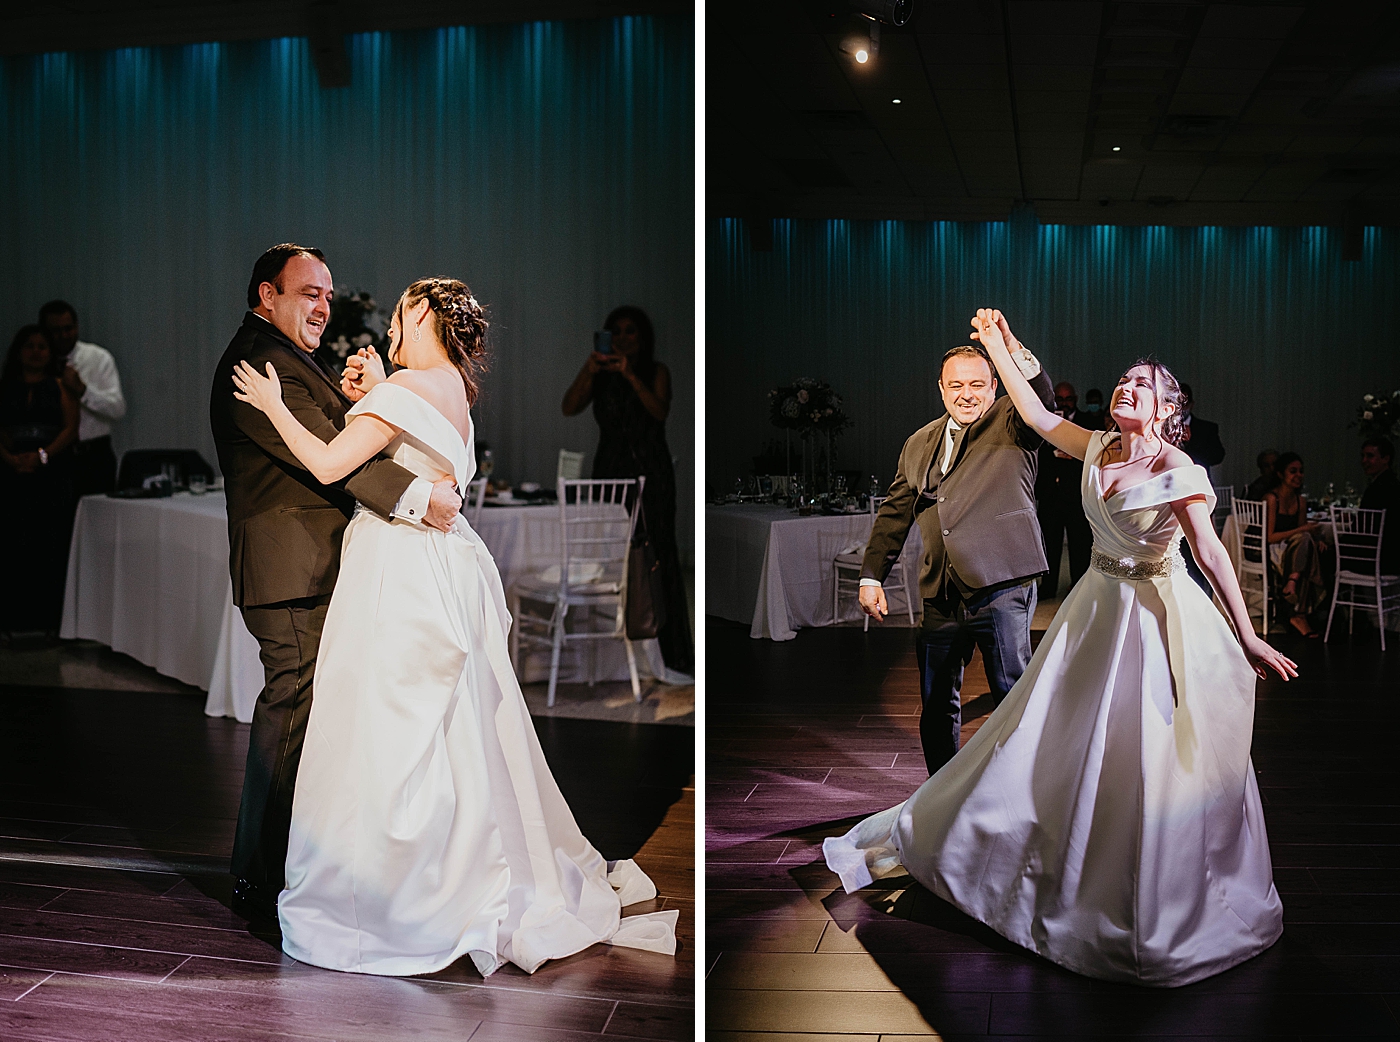 Father daughter fun dance at Reception Lavan Venue Wedding Photography captured by South Florida Wedding Photographer Krystal Capone Photography